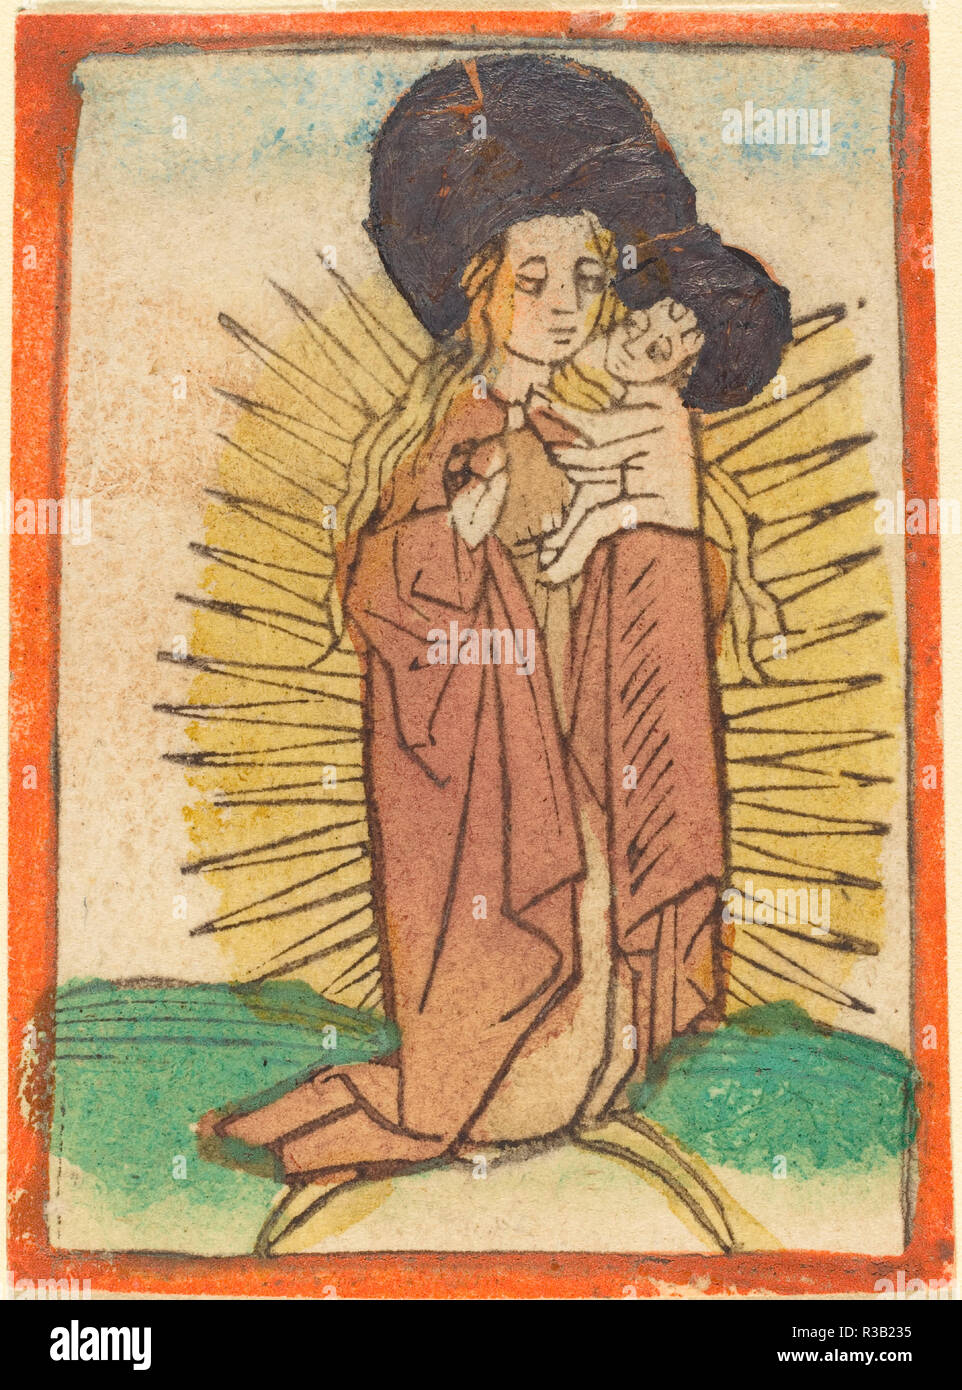 Madonna and Child in a Glory Standing on a Crescent Moon. Dated: c. 1470. Medium: woodcut in dark brown, hand-colored in rose, green, yellow, blue, brown, gold, and orange. Museum: National Gallery of Art, Washington DC. Author: German 15th Century. Stock Photo